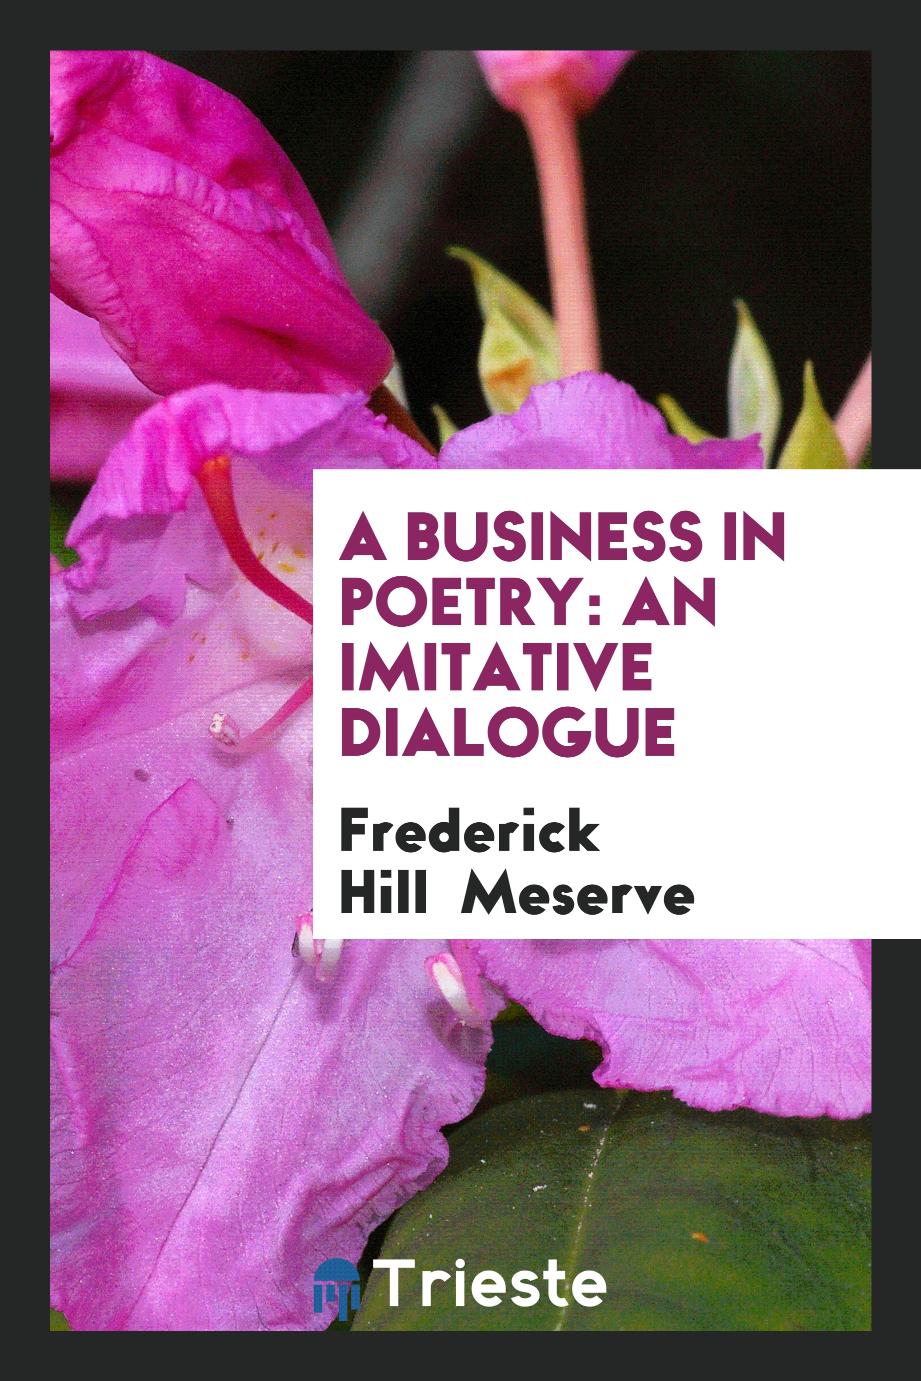 A Business in Poetry: An Imitative Dialogue